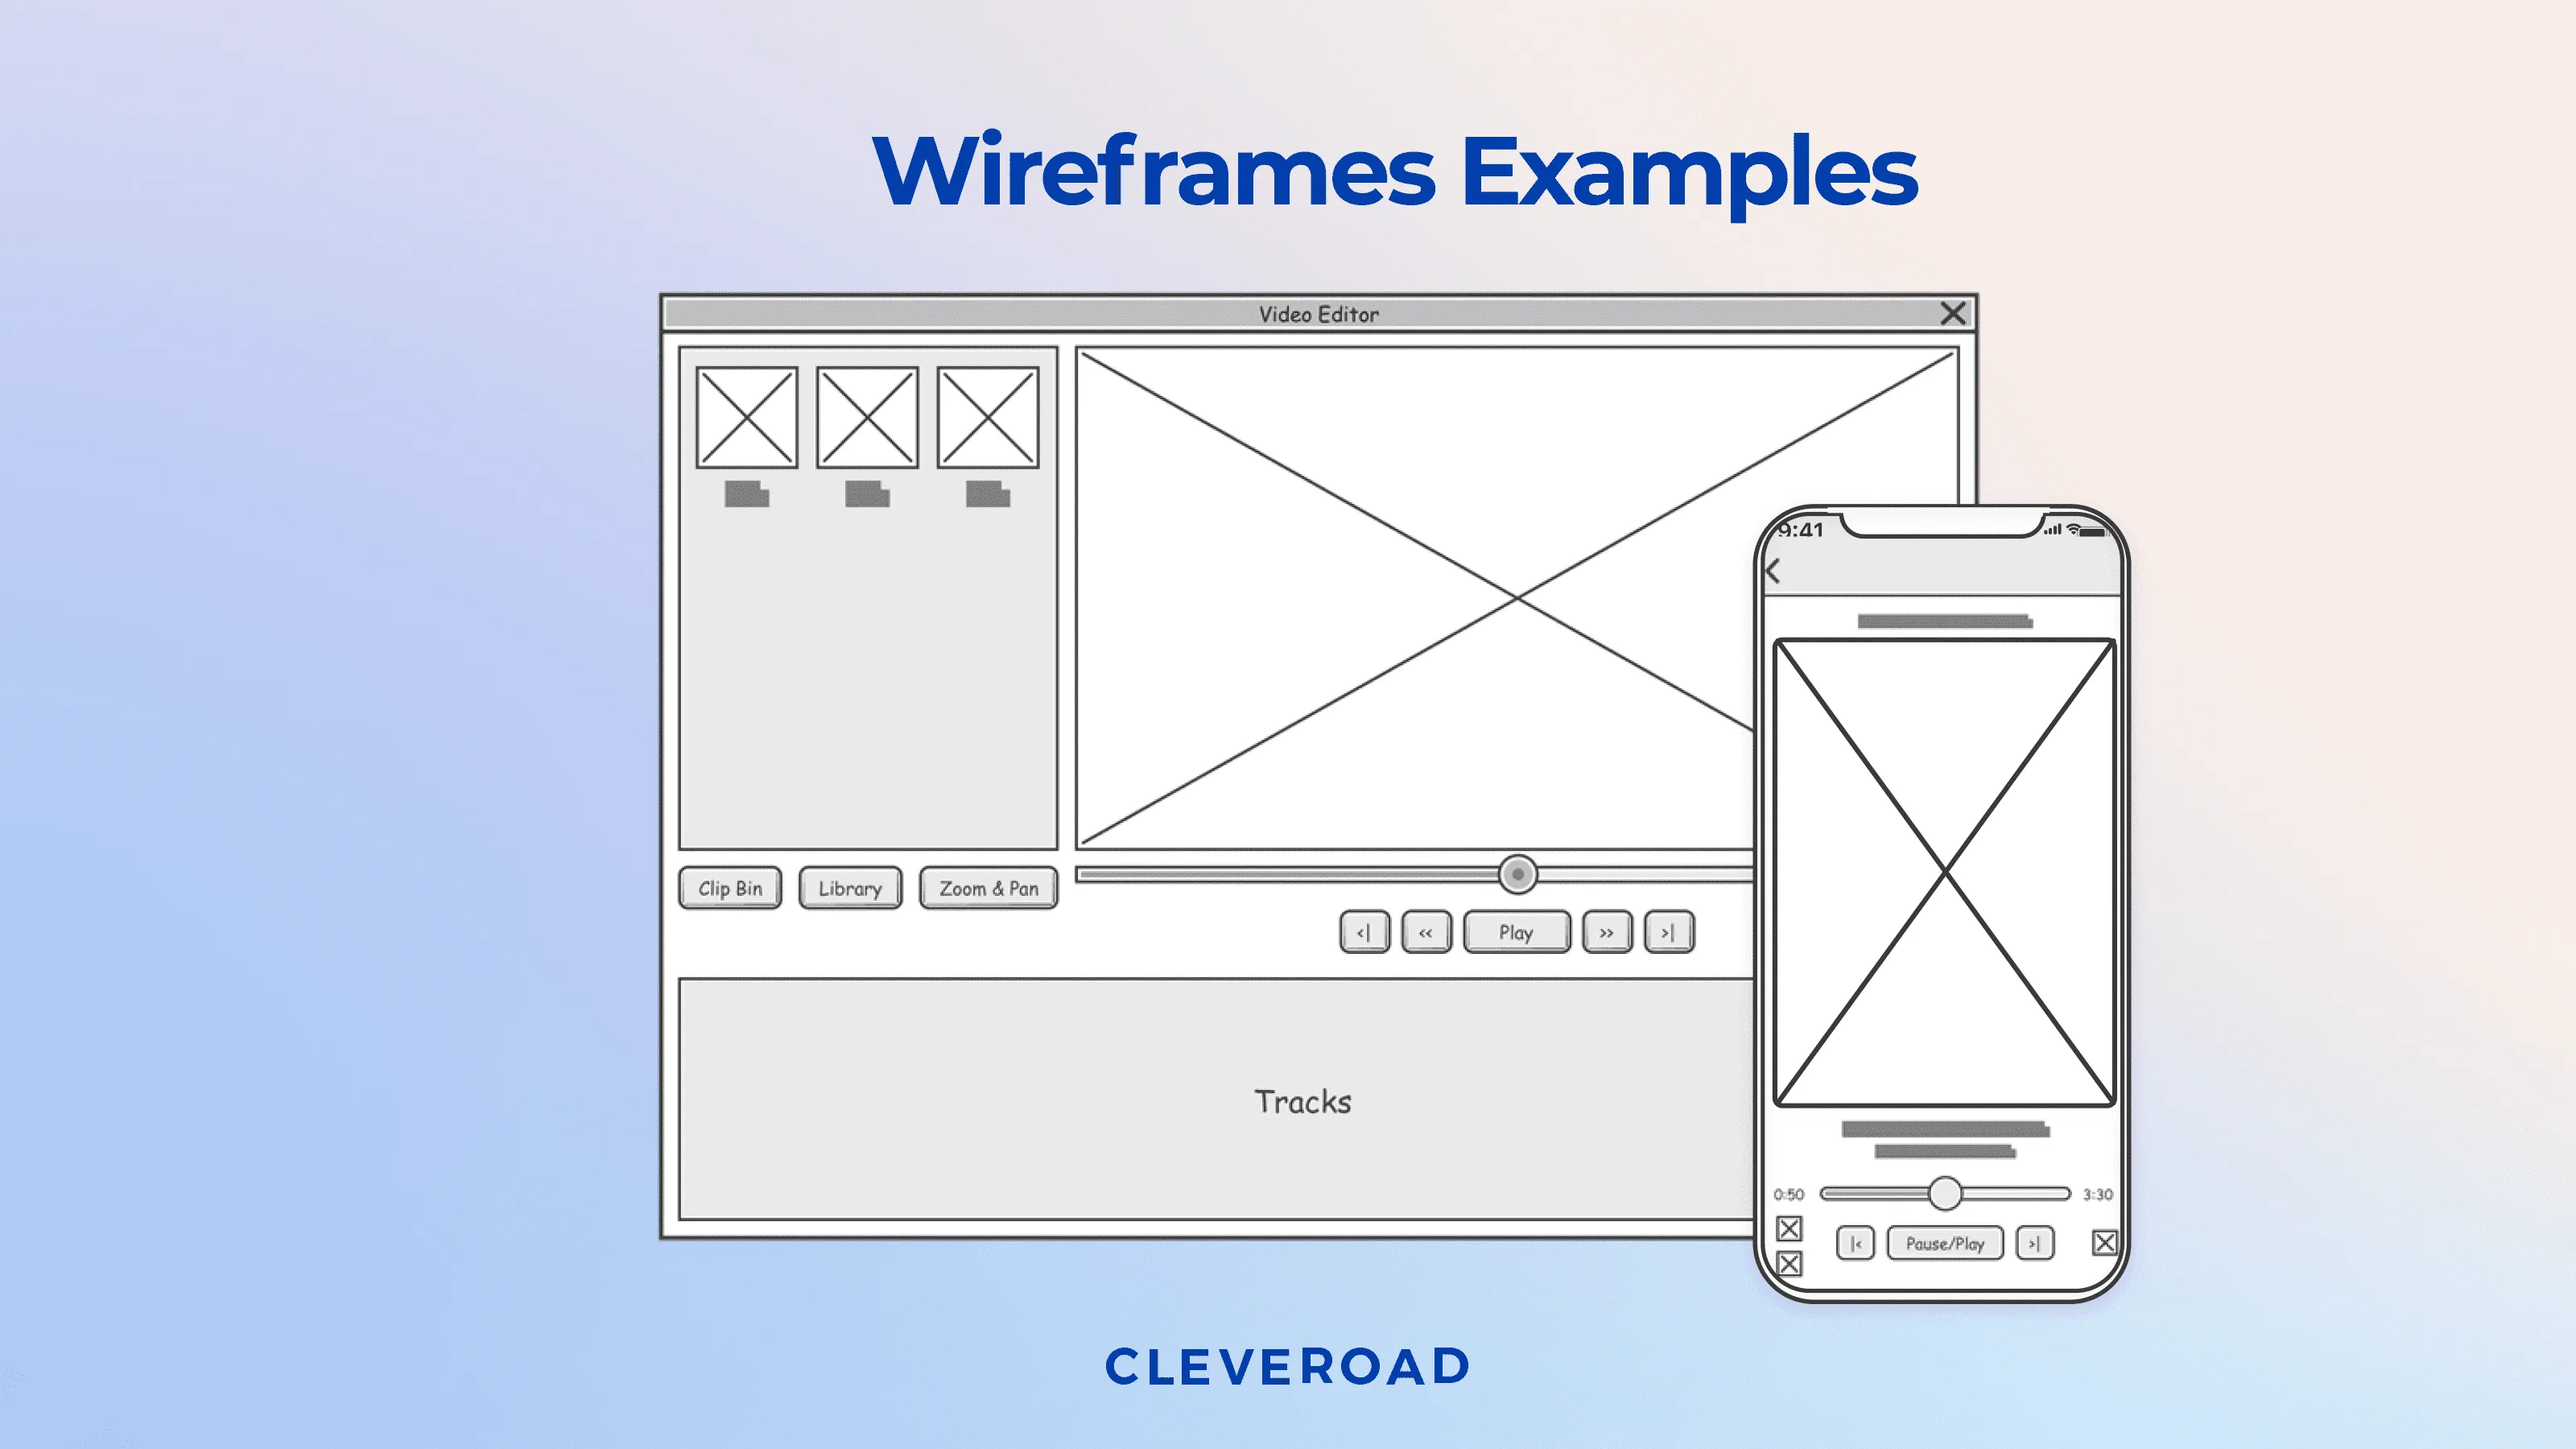 Wireframes examples